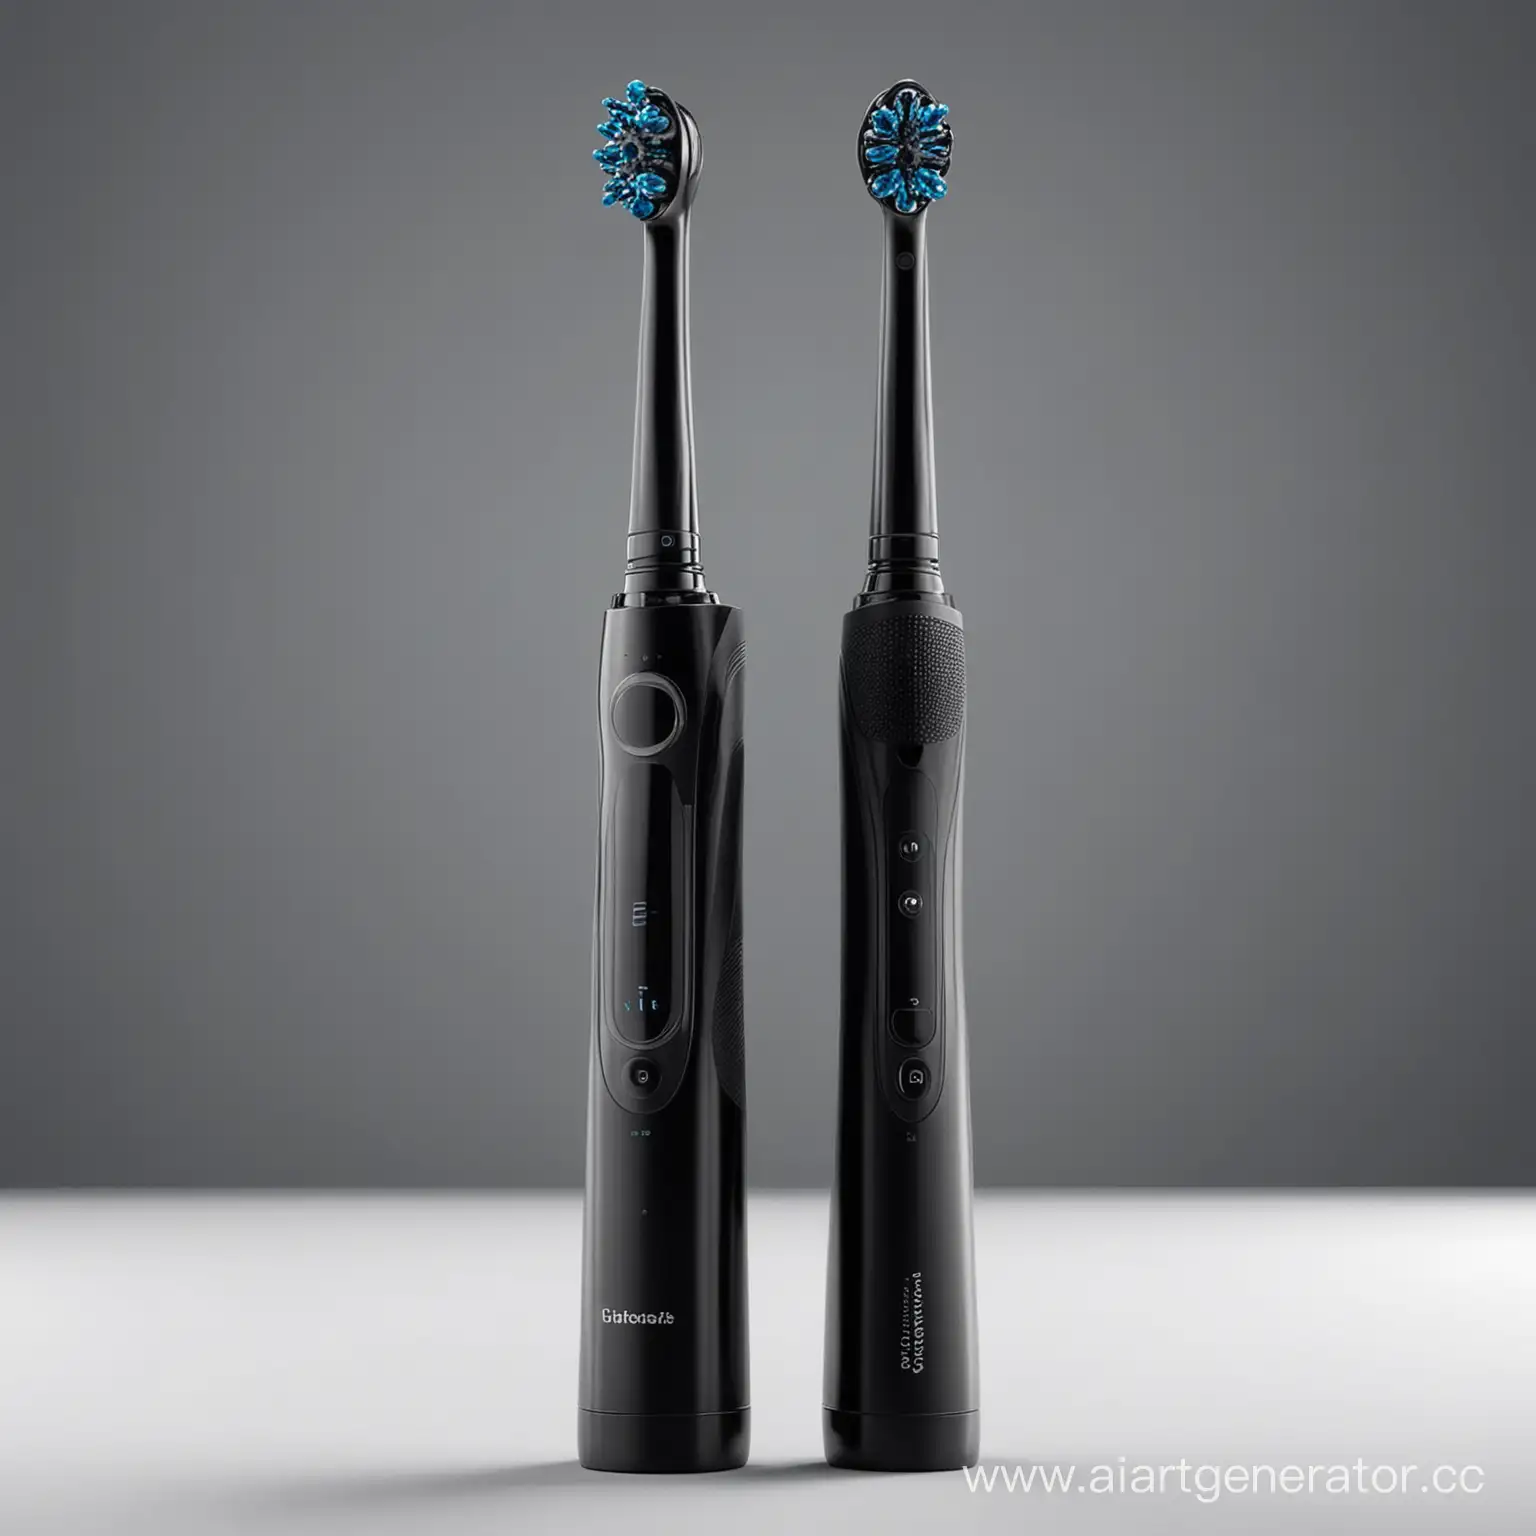 HighDefinition-HyperRealistic-Black-Electric-Toothbrush-Satisfier-Design